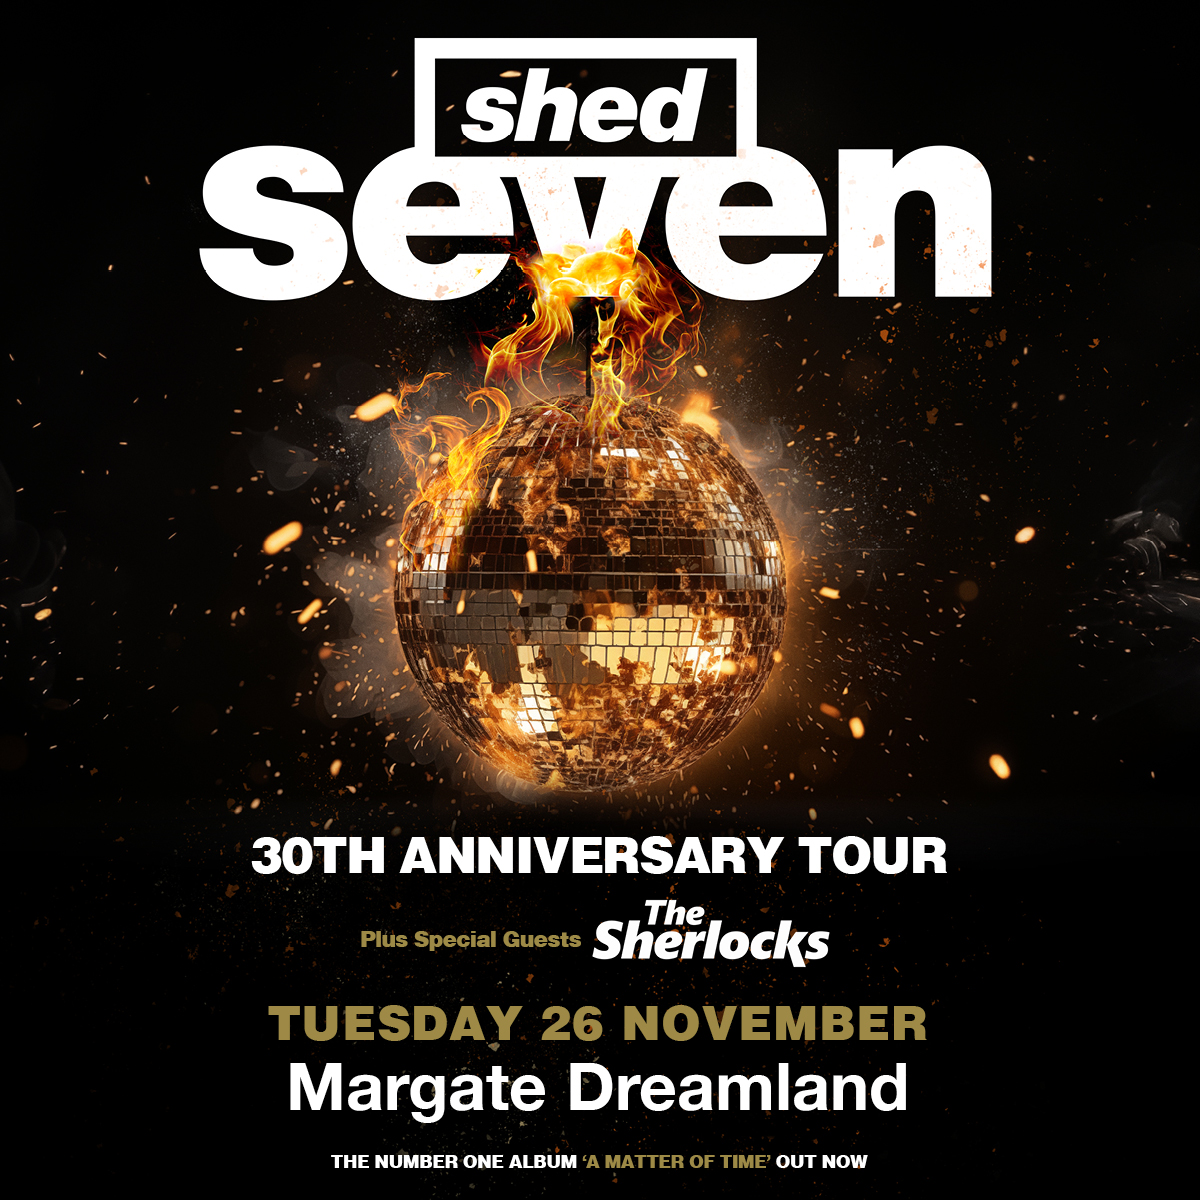 This November, @shedseven will be playing at our Hall By The Sea as part of their 30th anniversary tour! 💫 Plus special guests @TheSherlocks 🎸 Tickets are now on sale here 🎟️ bit.ly/3Vv66vw